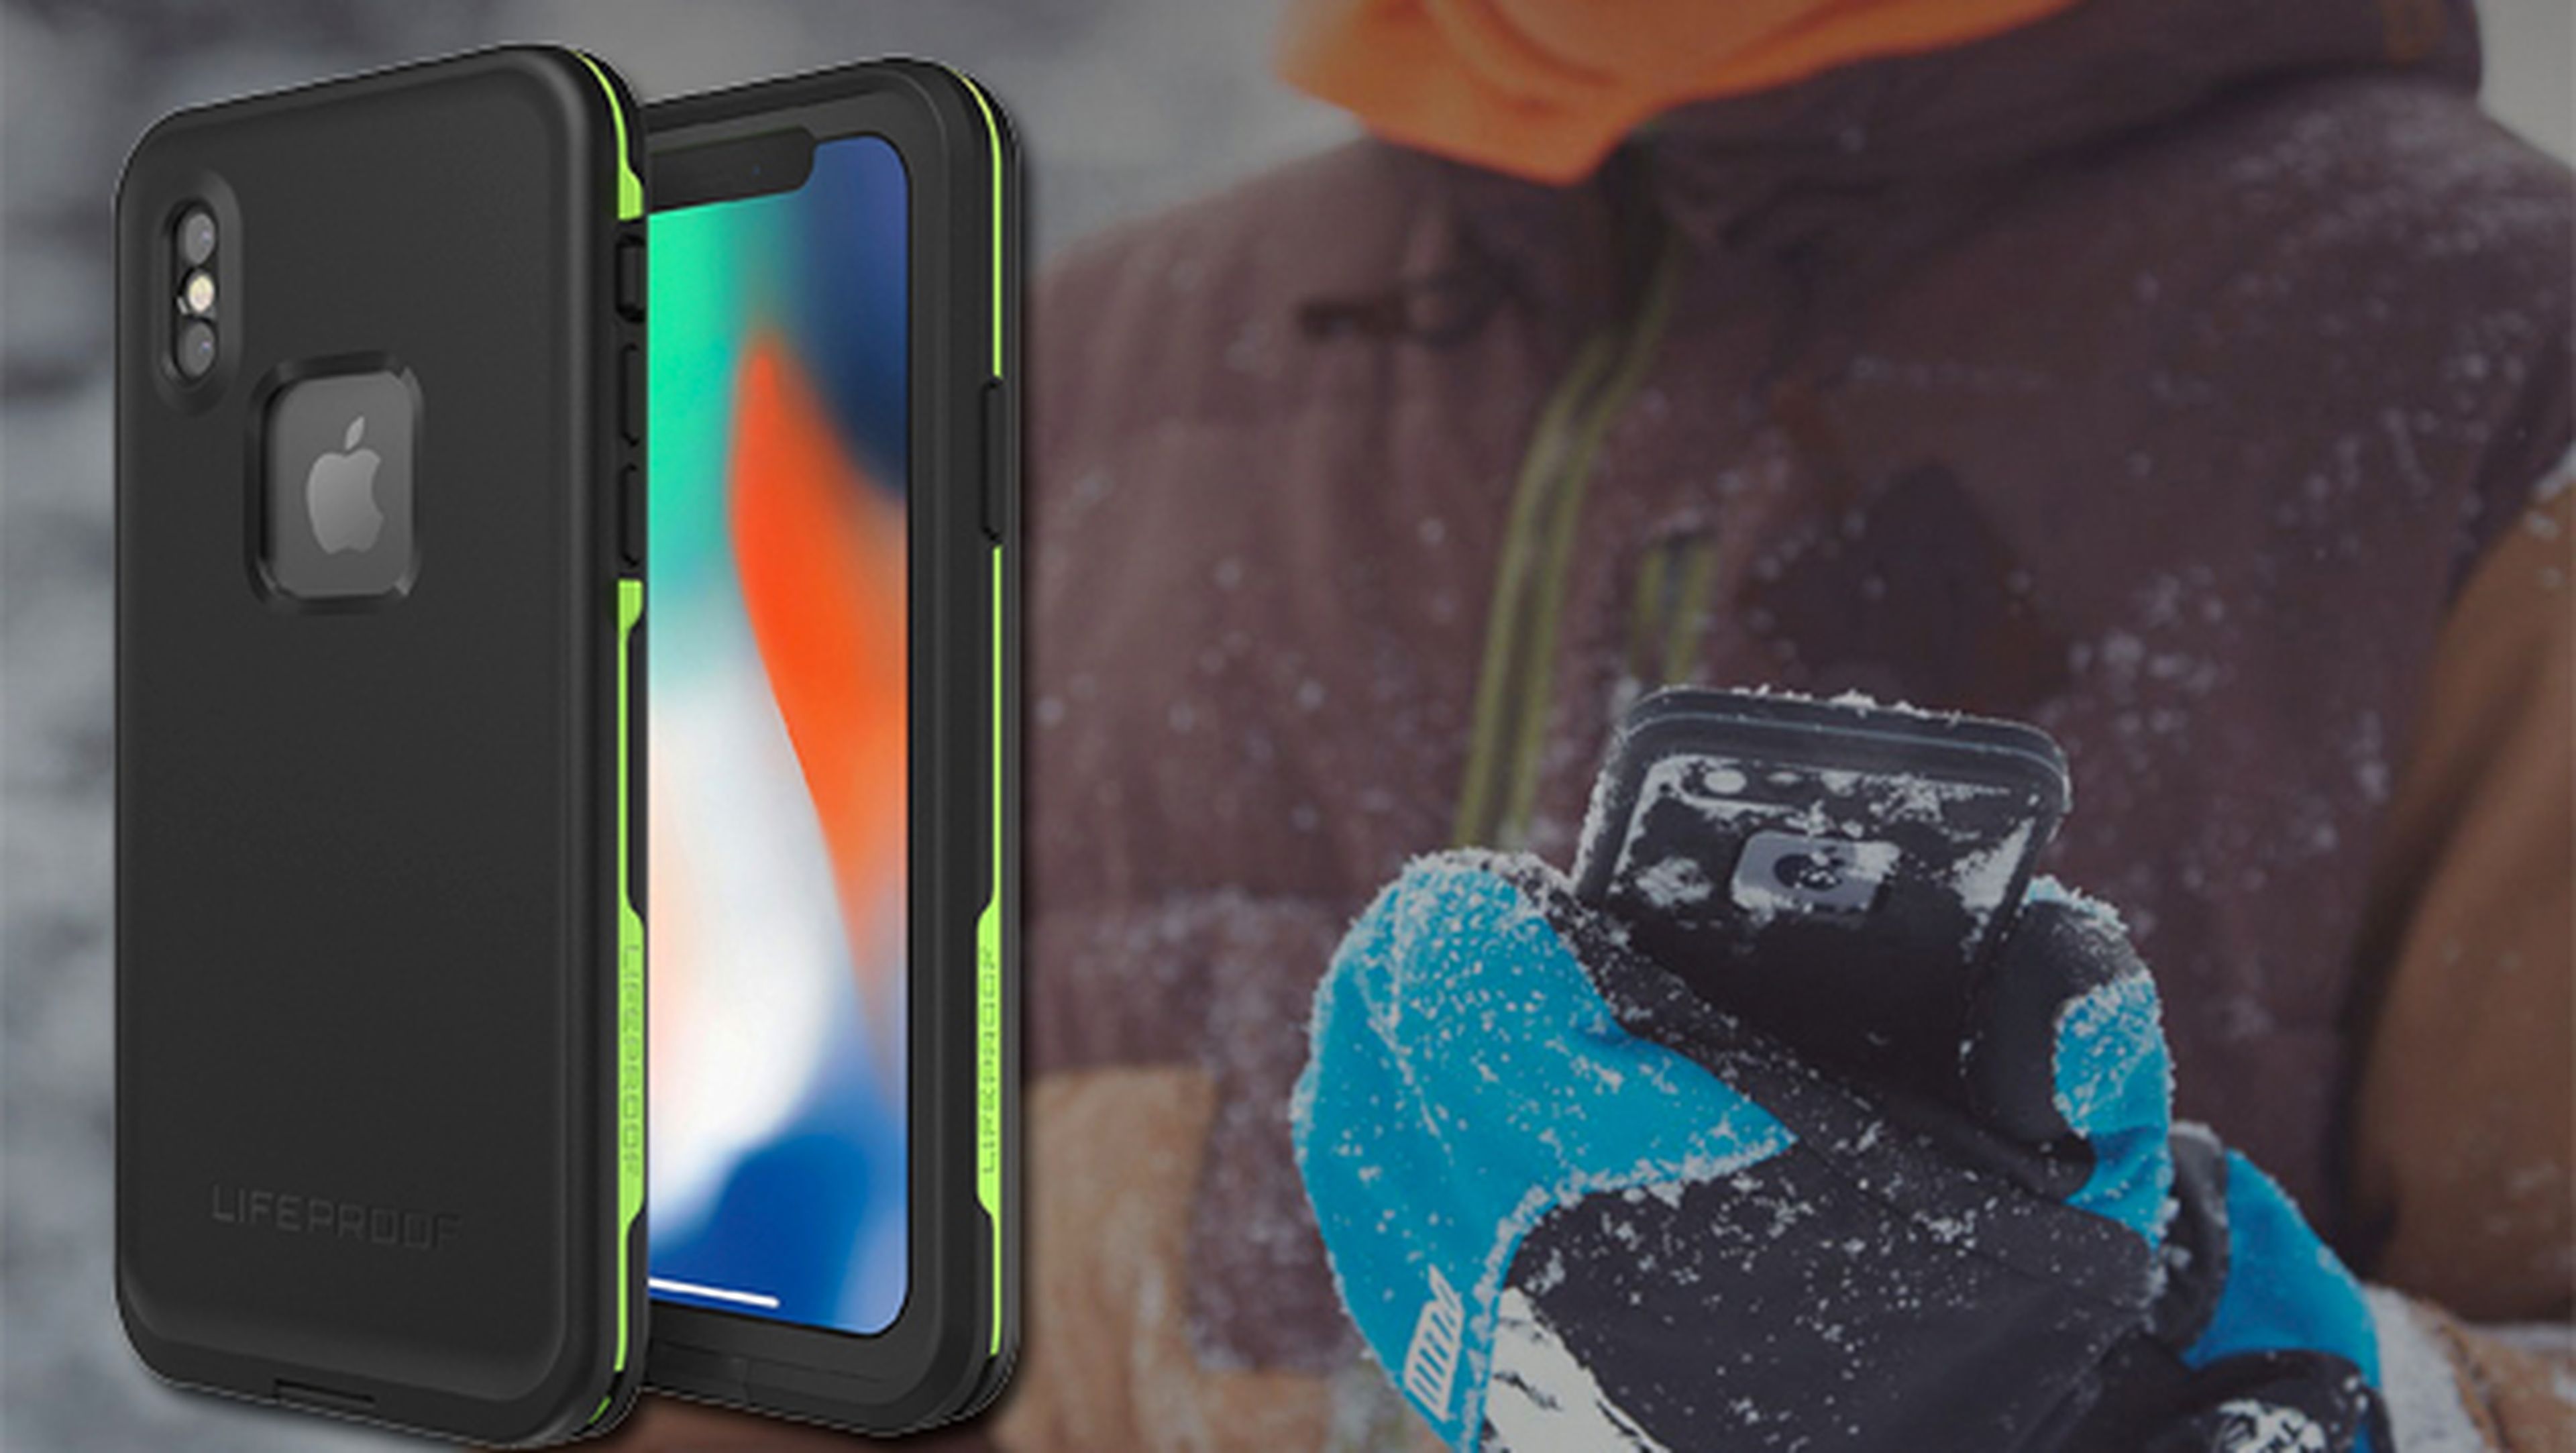 Waterproof case for iPhone X